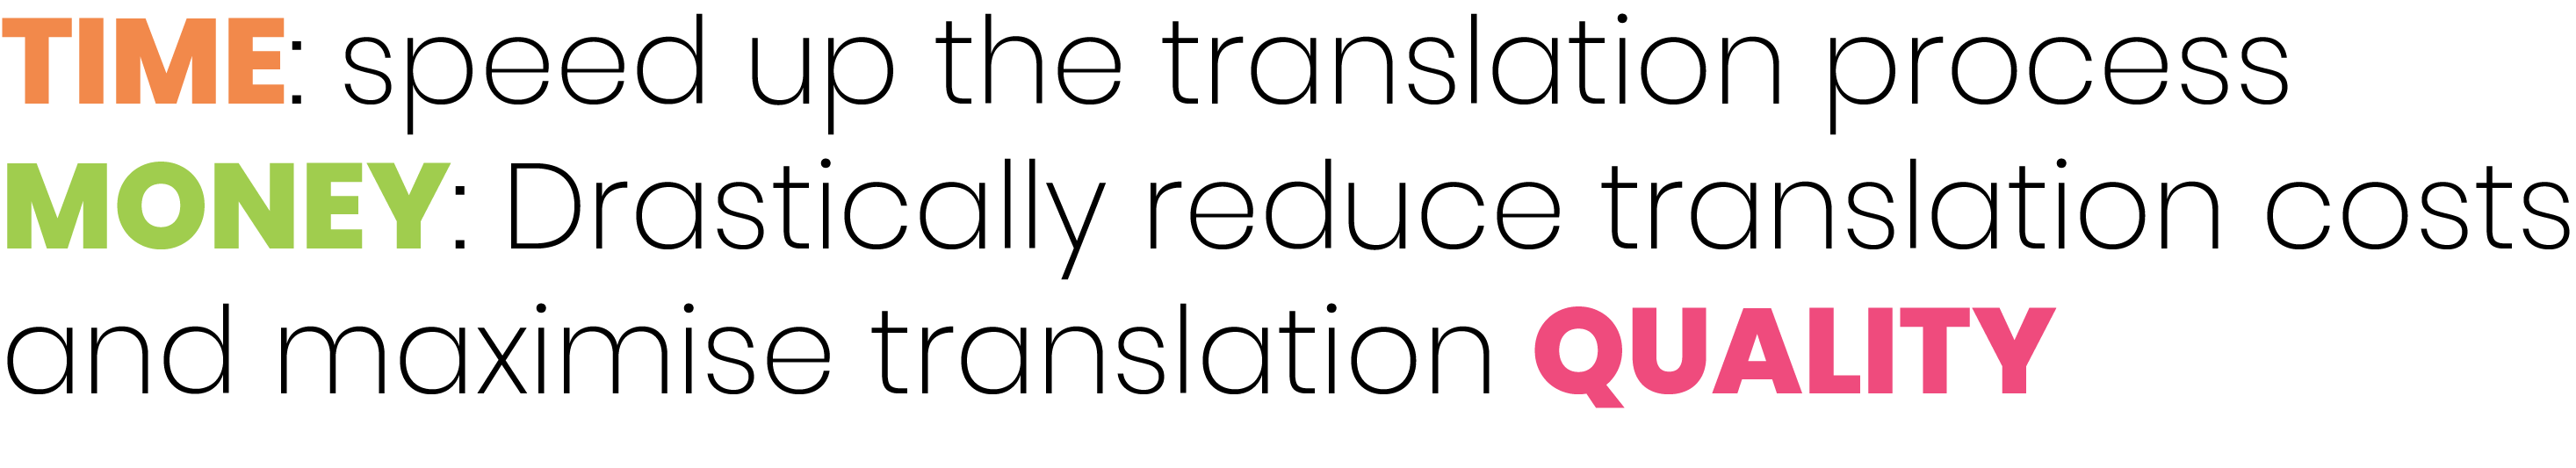 //eurotranslate.rs/wp-content/uploads/2018/03/technical.png